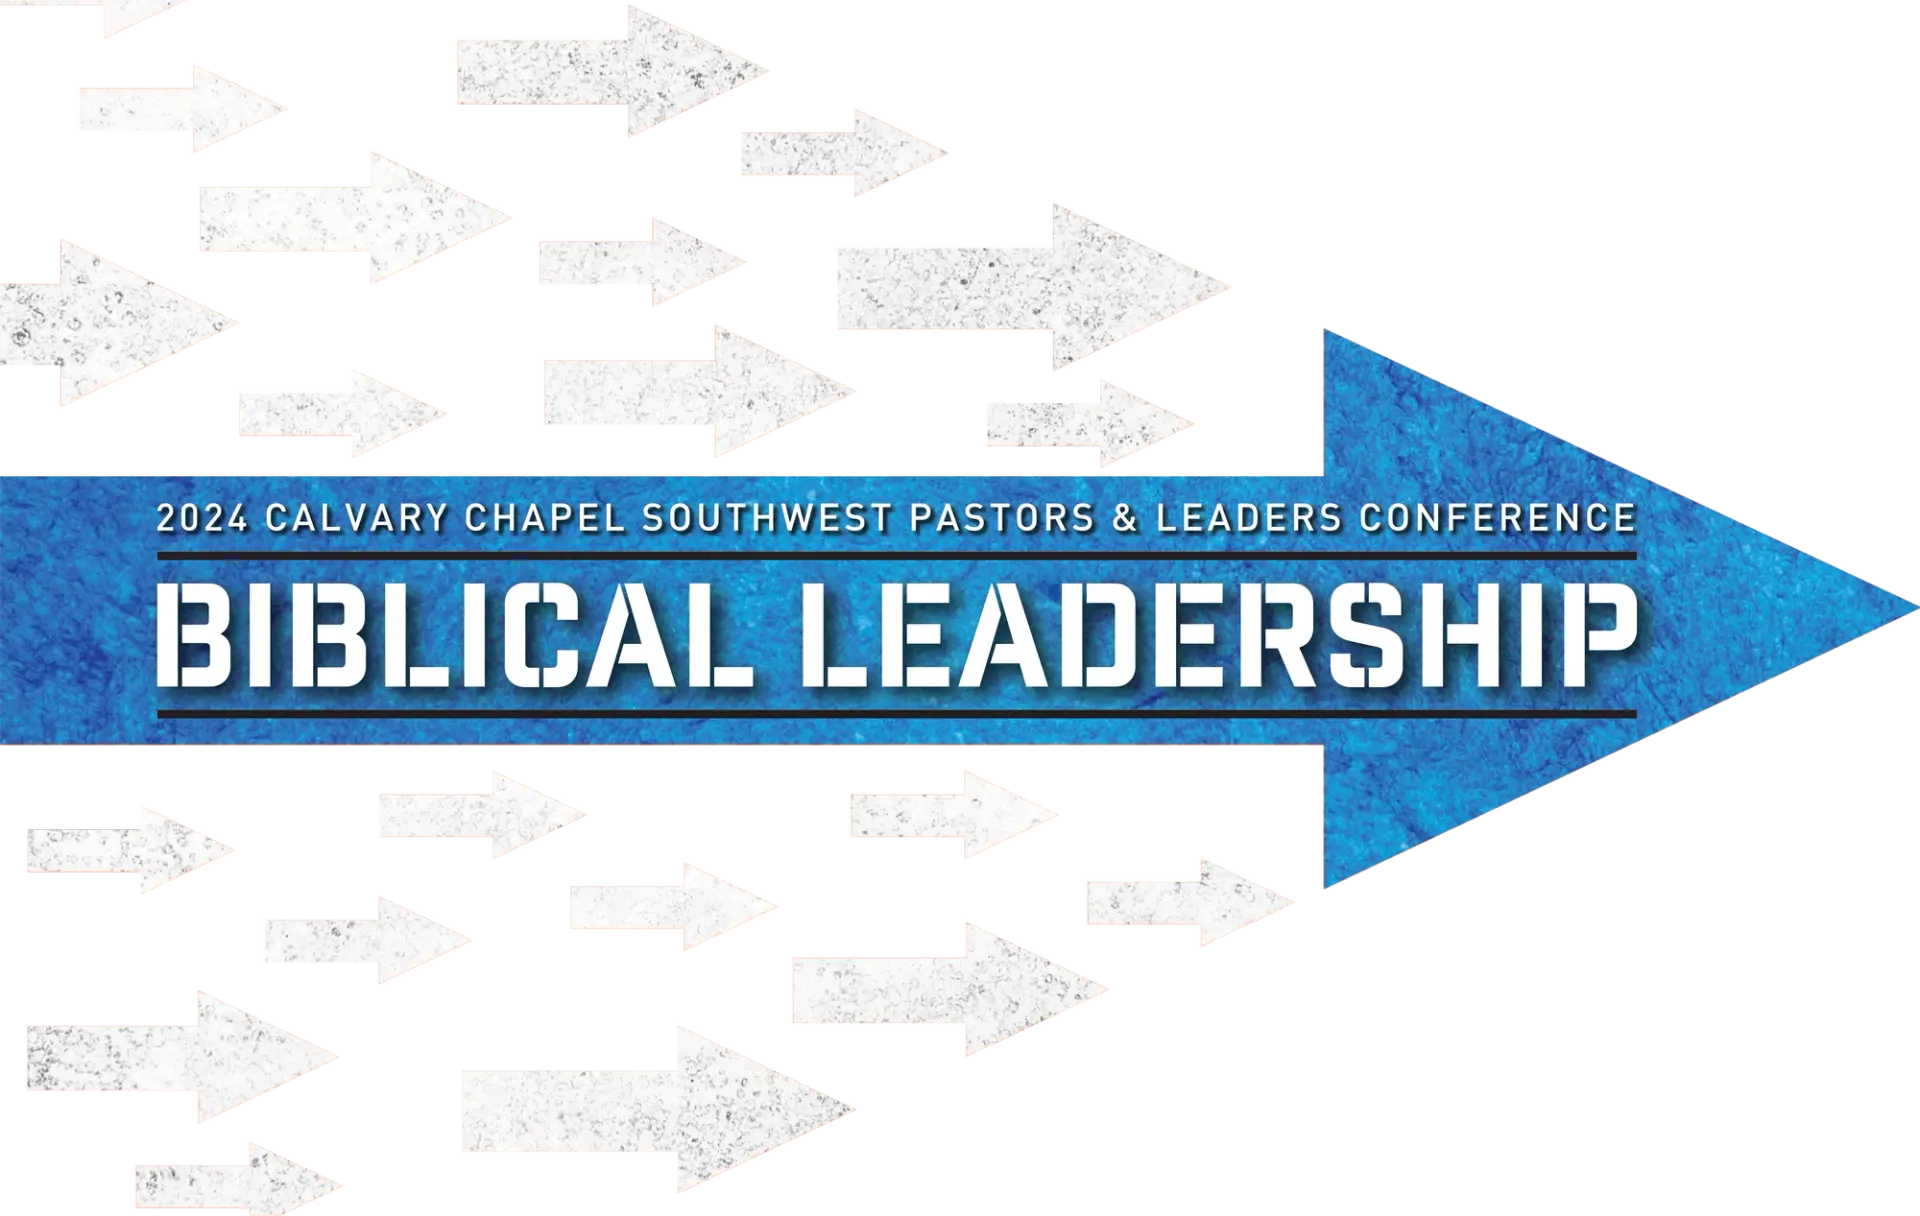 2024 calvary chapel southwest pastors and leaders conference: biblical leadership